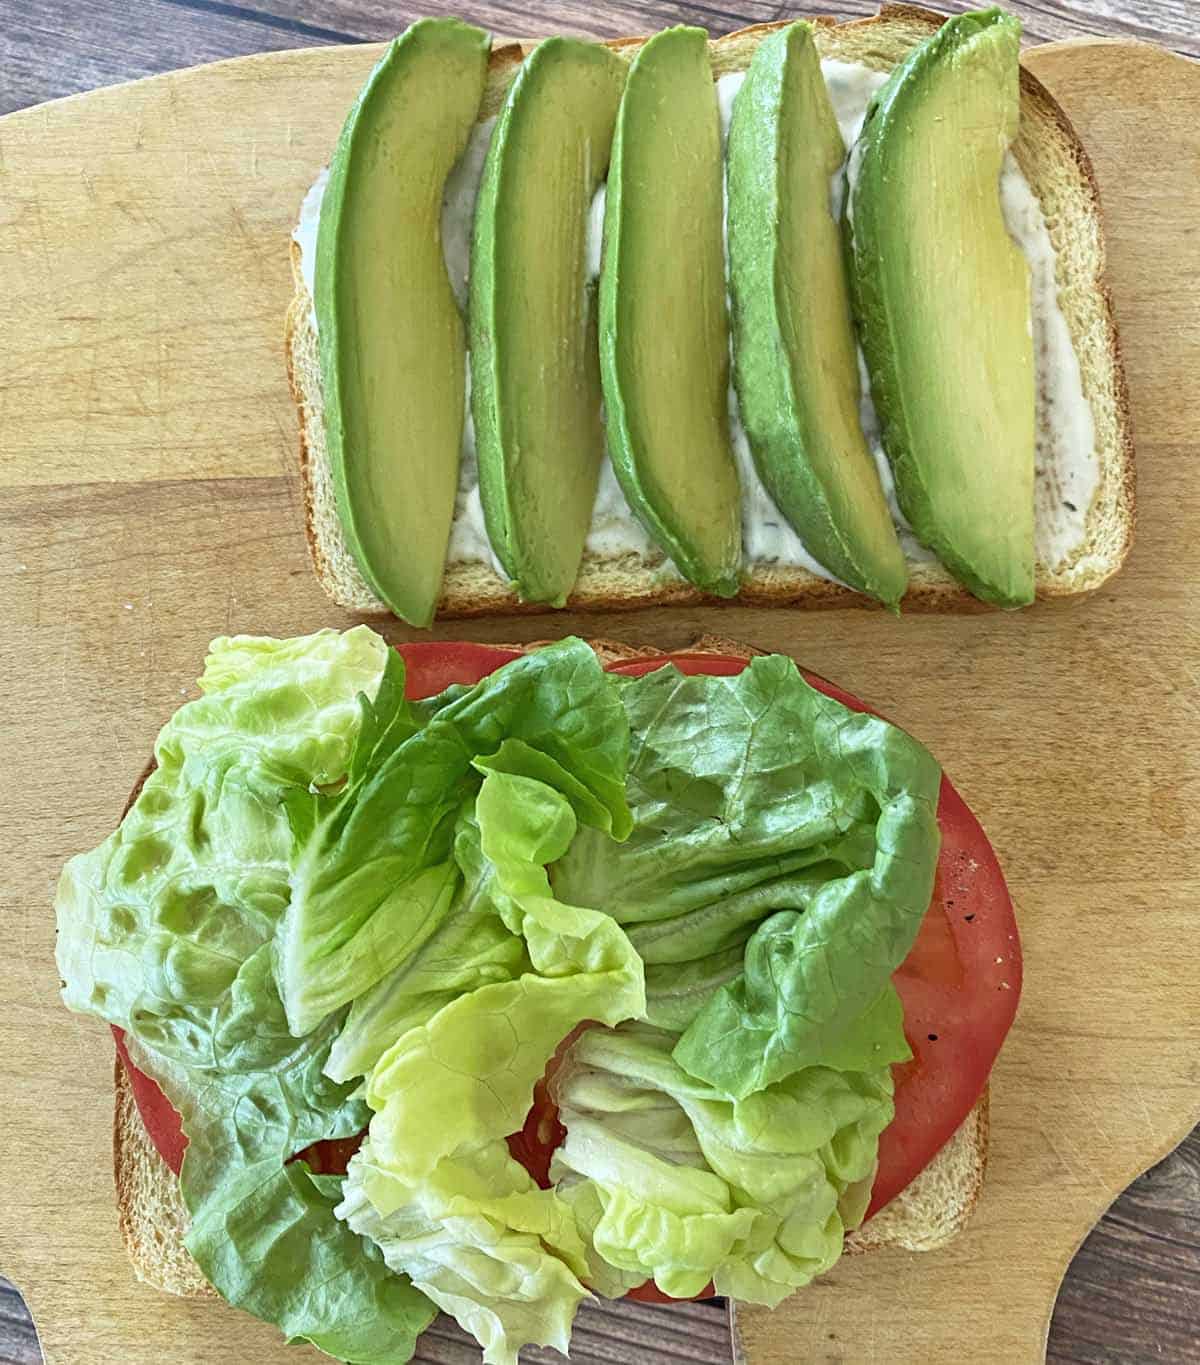 One piece of toast with basil mayonnaise and avocado, and one piece of toast with tomato and lettuce.